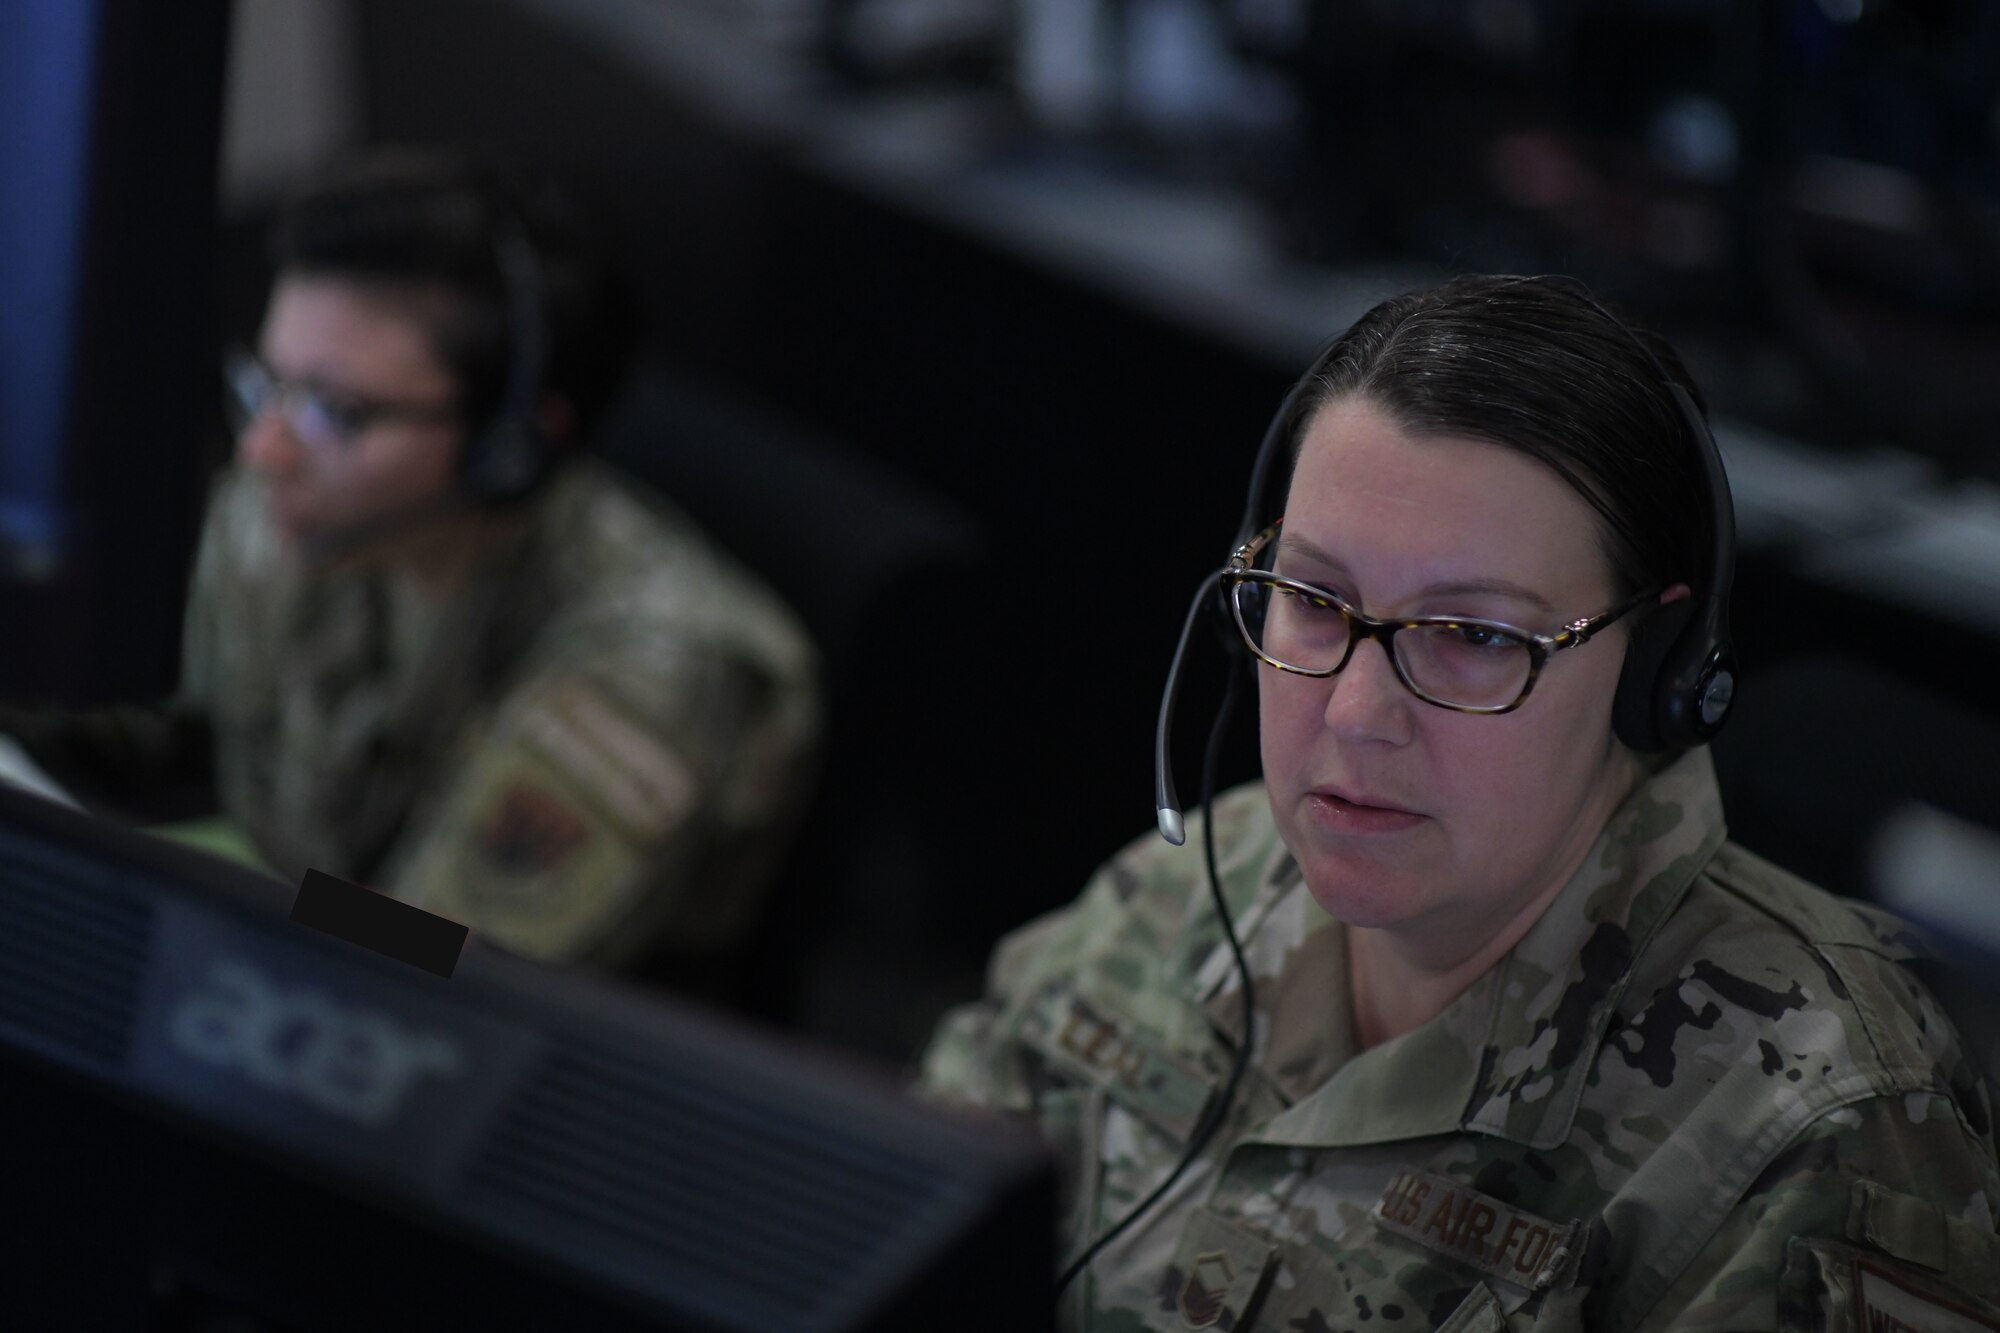 U.S. Air Force Master Sgt. Stephanie Leal, right, 81st ACS assistant operations superintendent, identifies aircraft at Tyndall Air Force Base, Florida, March 29, 2022.